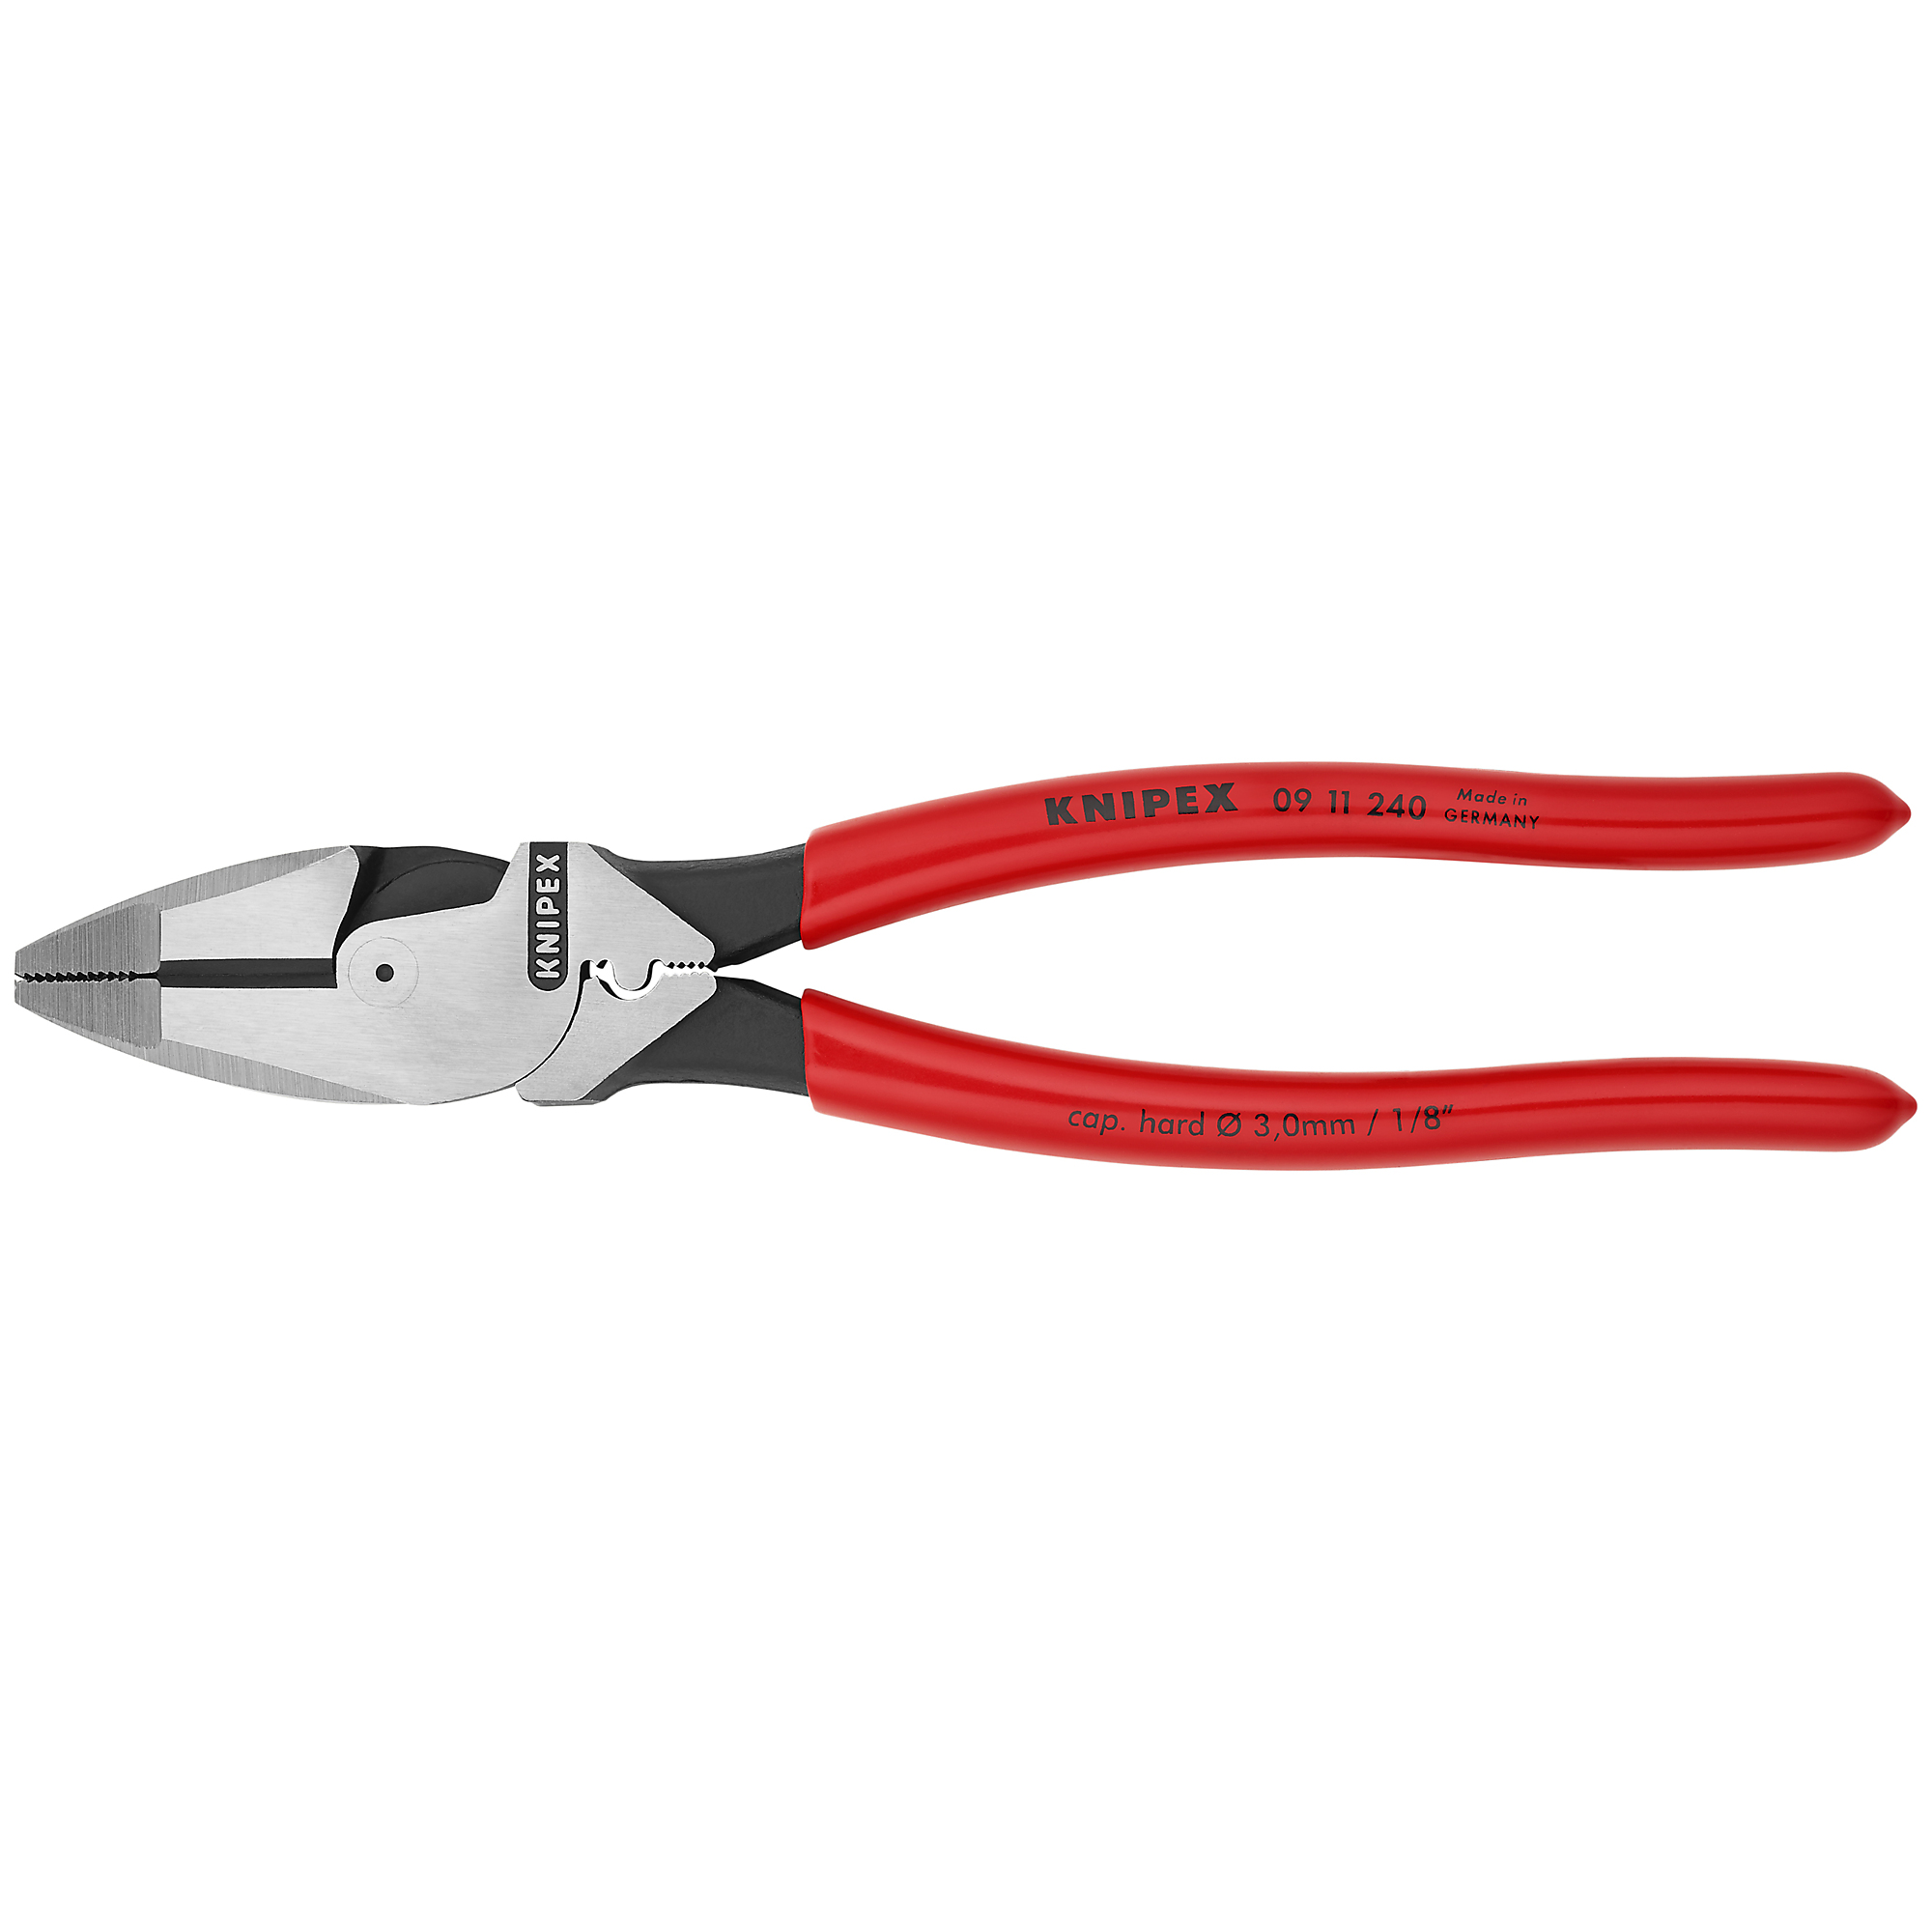 KNIPEX, HL Linemans NewEngland FishTape Puller/Crimp,9.5Inch, Pieces (qty.) 1 Material Steel, Jaw Capacity 0.188 in, Model 09 11 240